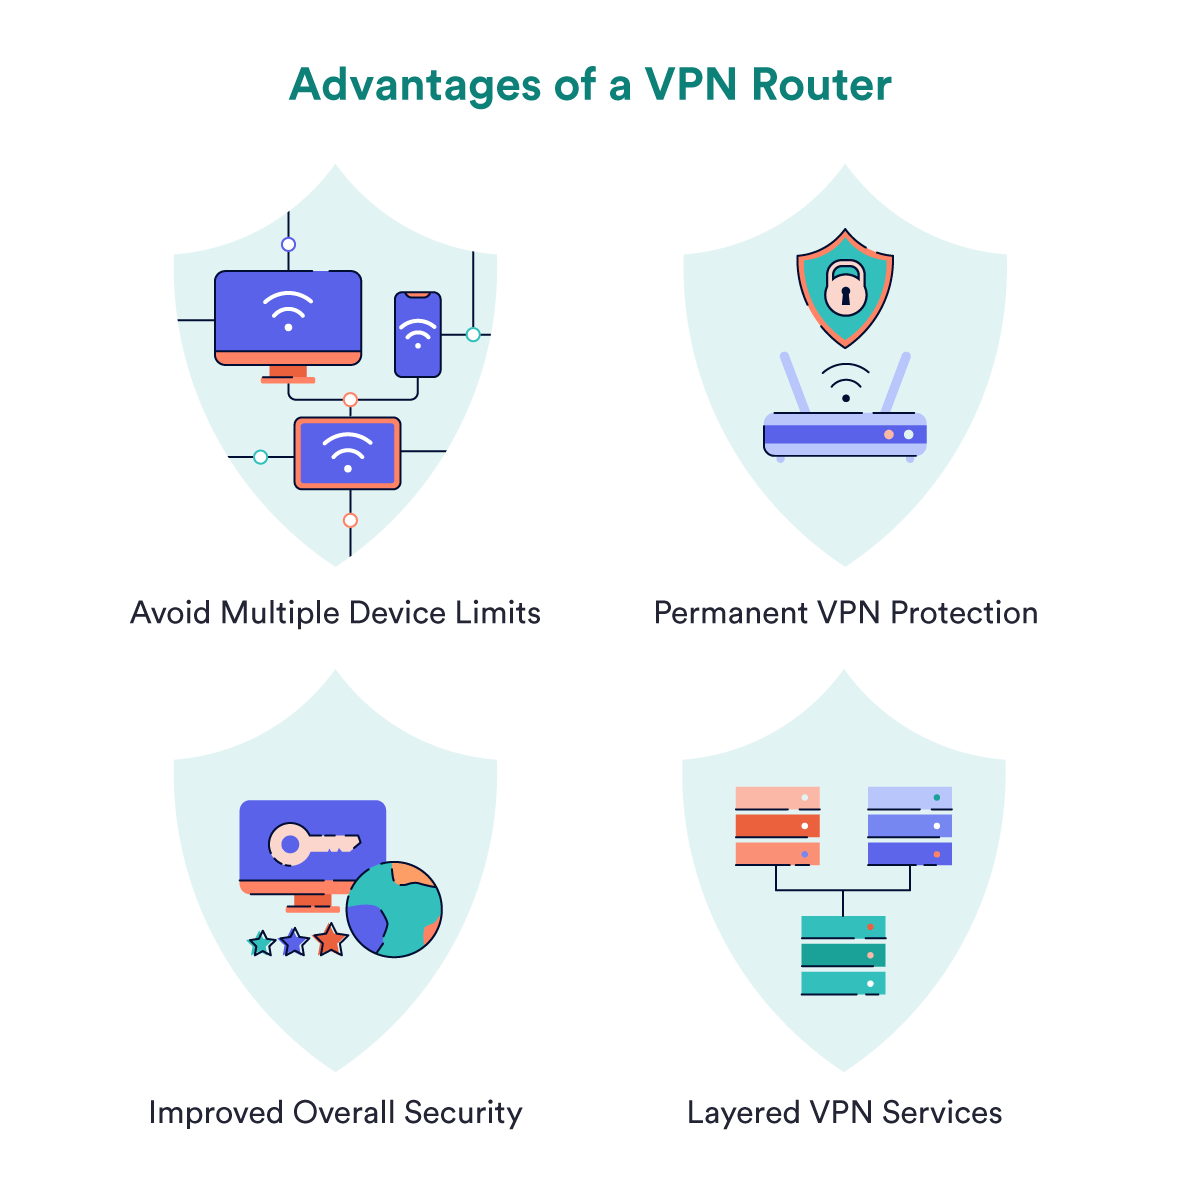 Illustration showing the advantages of a VPN router.